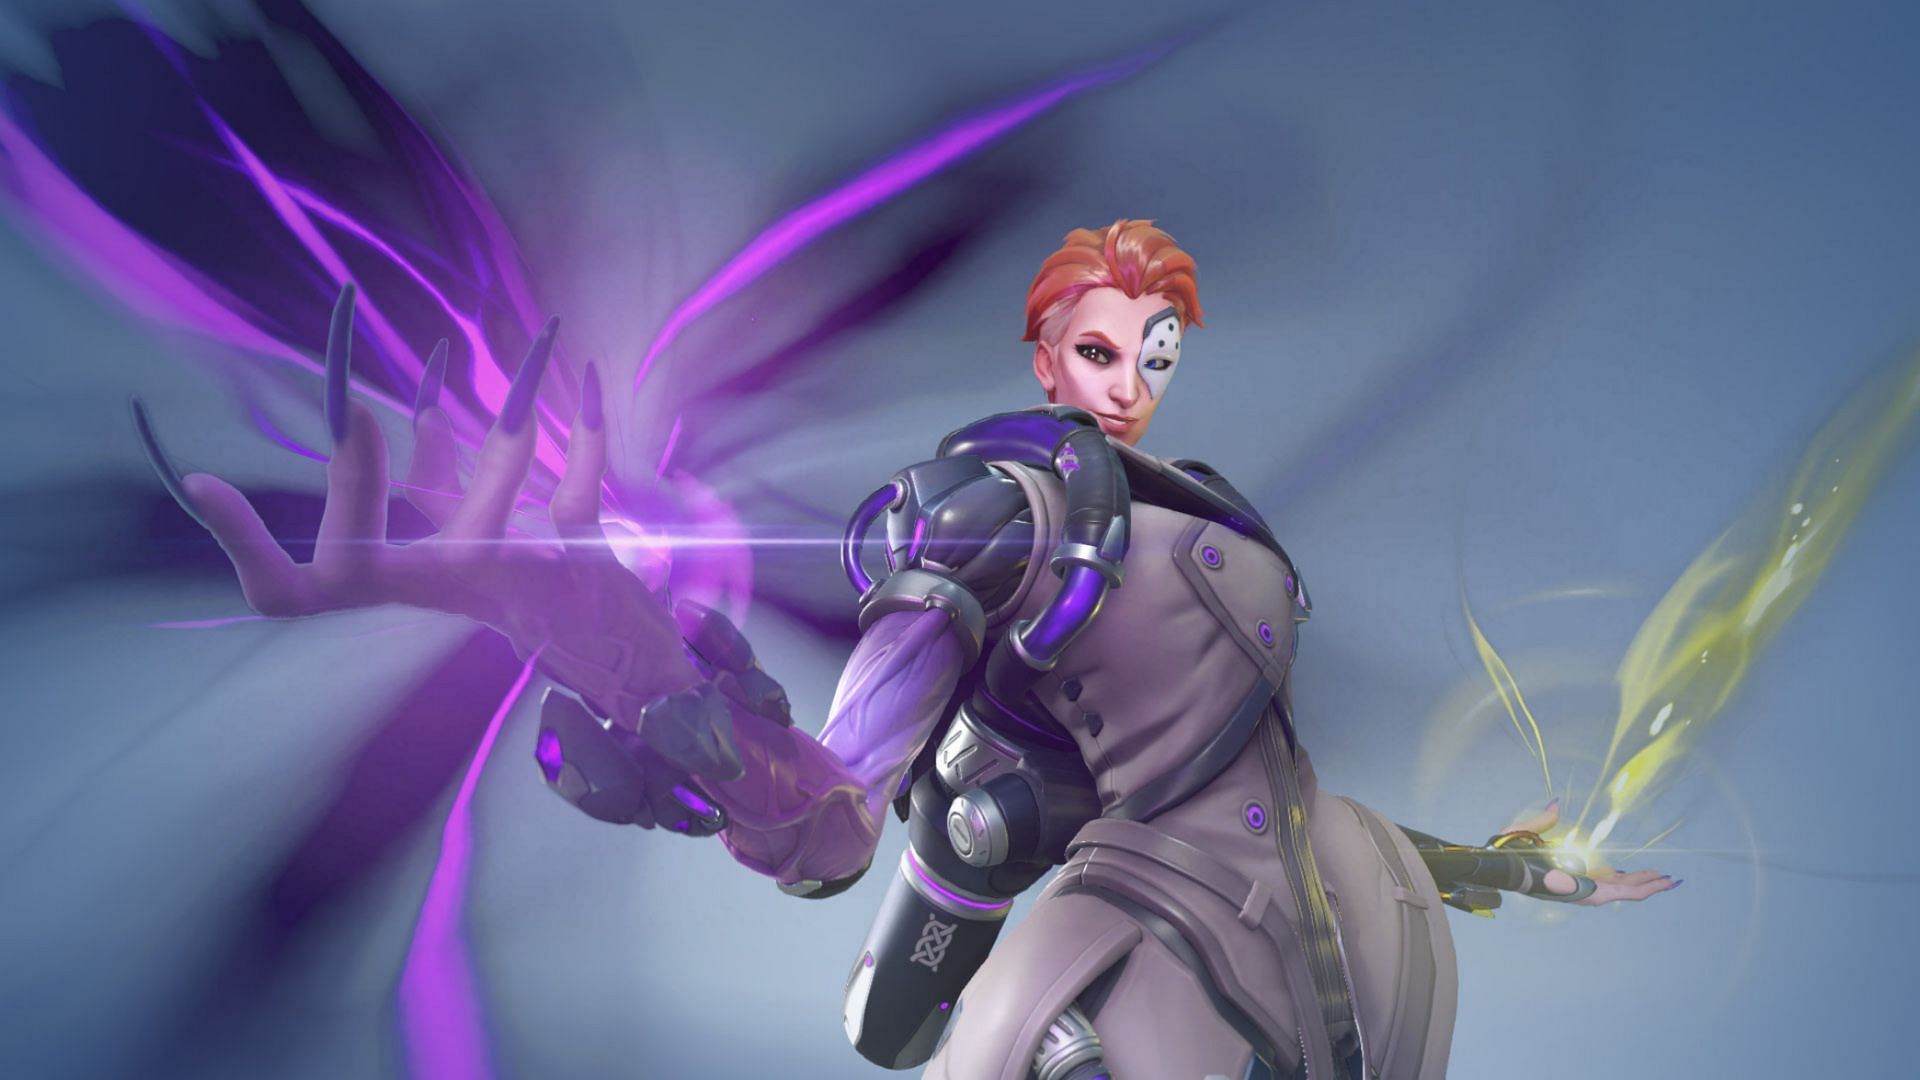 Moira with her new design in Overwatch 2 (Image via Blizzard)